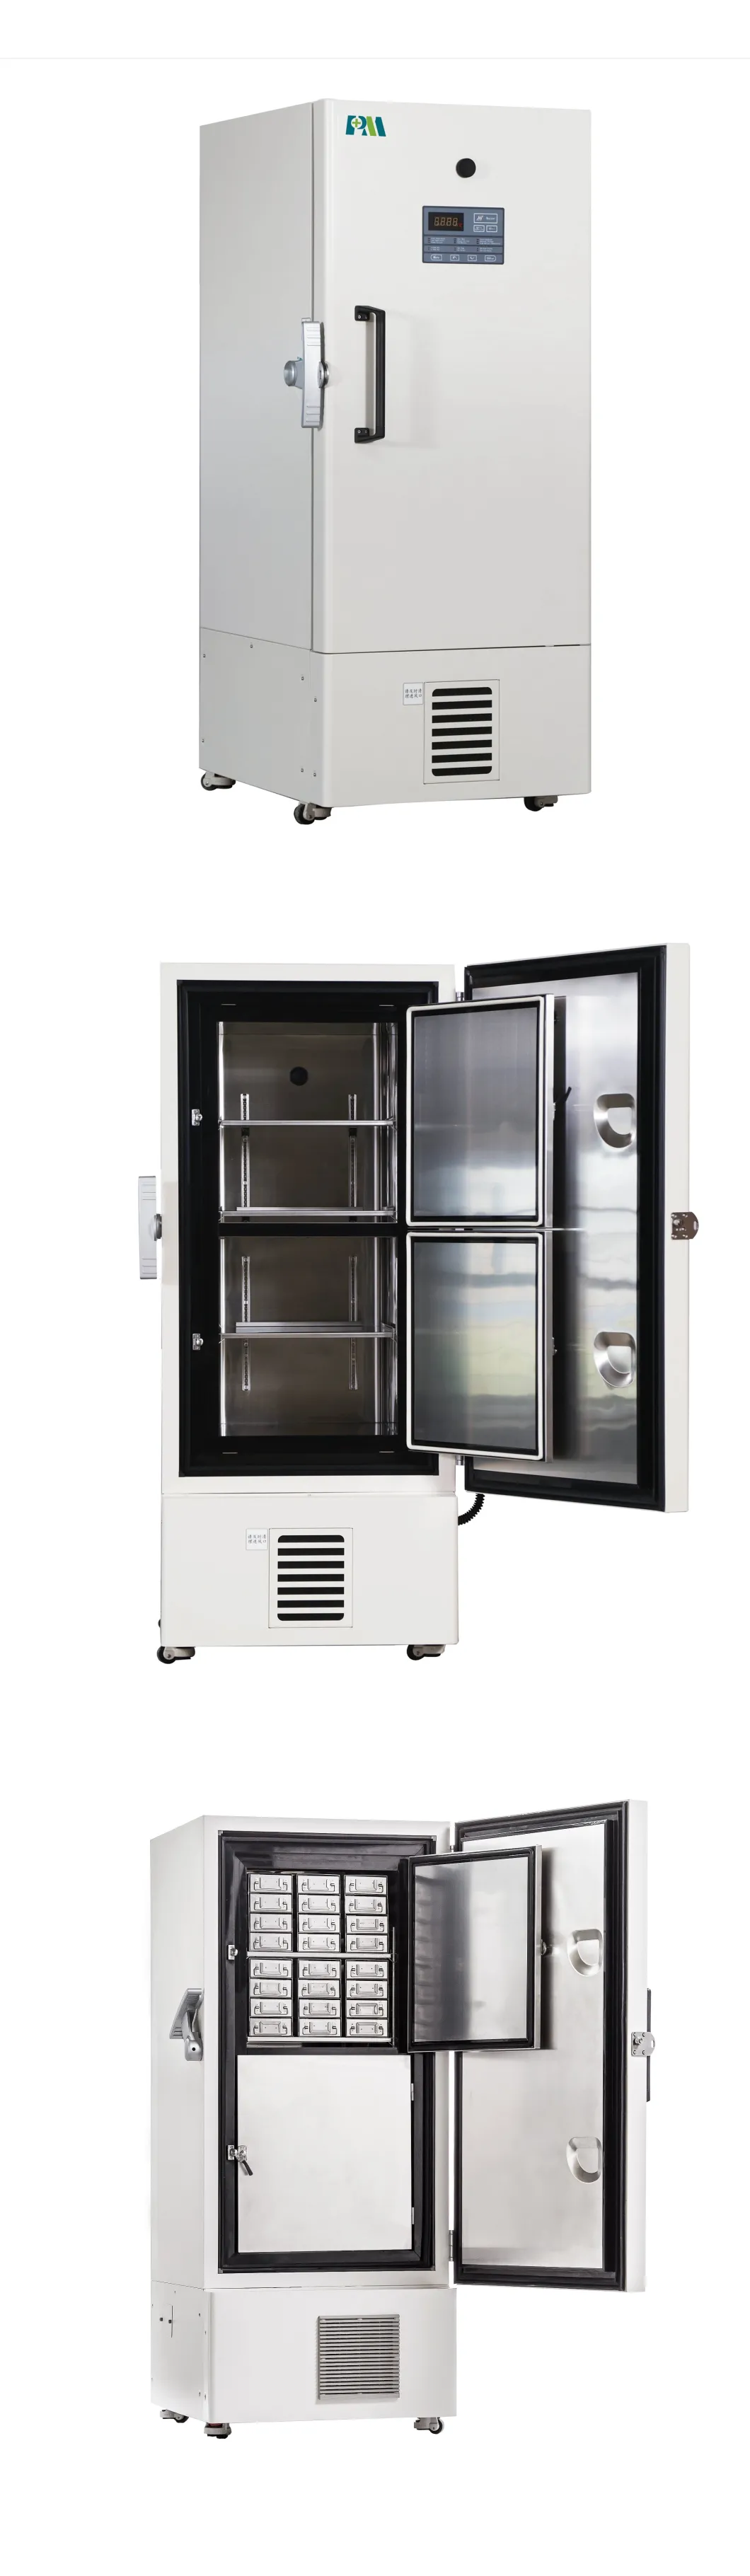 Energy Saving -86 Degrees Ult Freezer with 340 Liters Capacity for Laboratory and Hospital